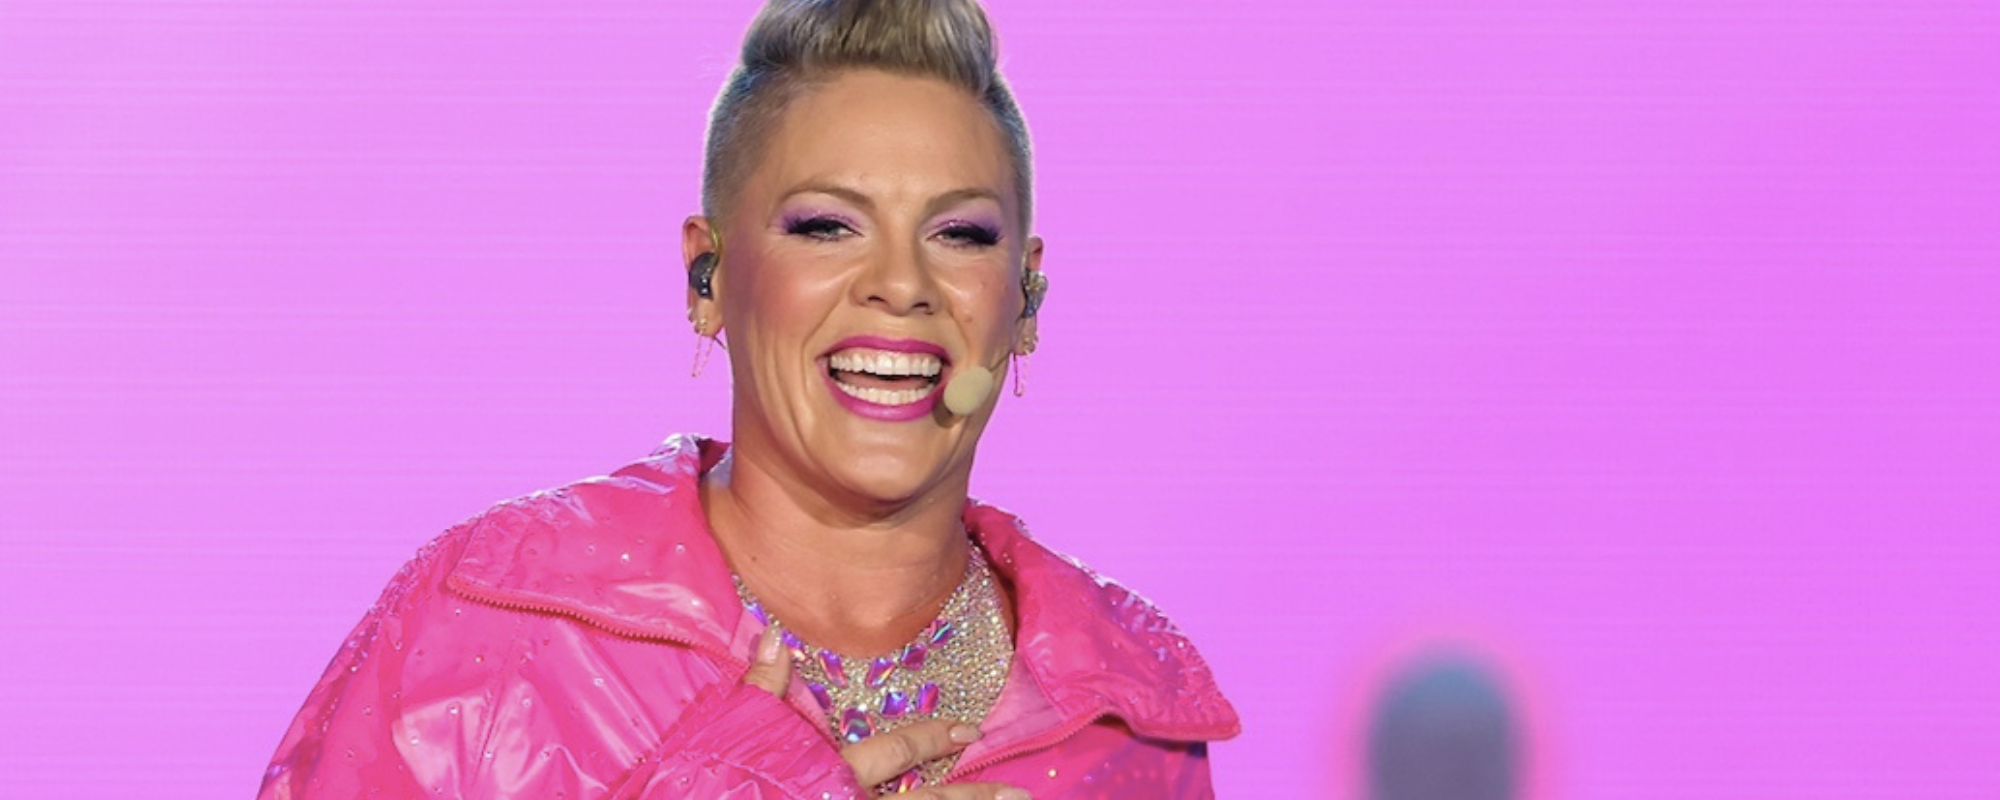 Listen: P!nk Collaborates with Sting and Marshmello on New Song Called “Dreaming”